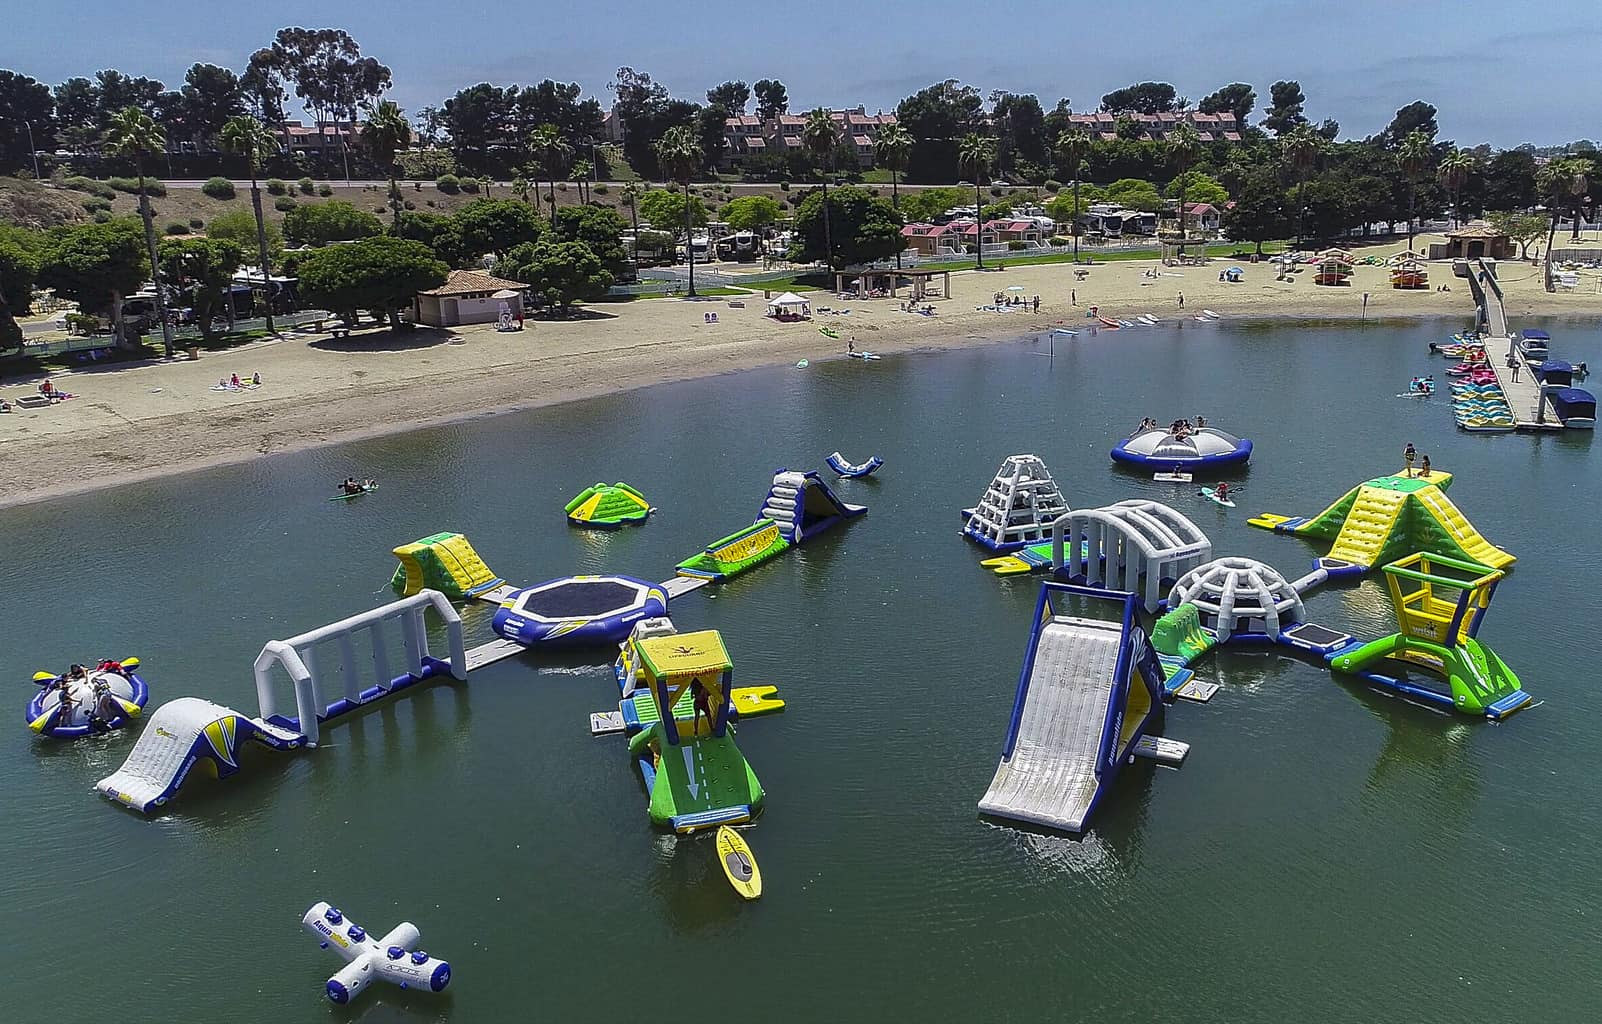 Newport Dunes Waterfront Resort has over 110 acres of gorgeous beach front property with wonderful amenities such as a waterpark, stand up paddle boarding, swimming, kayaking and a playground on the beach for kids.